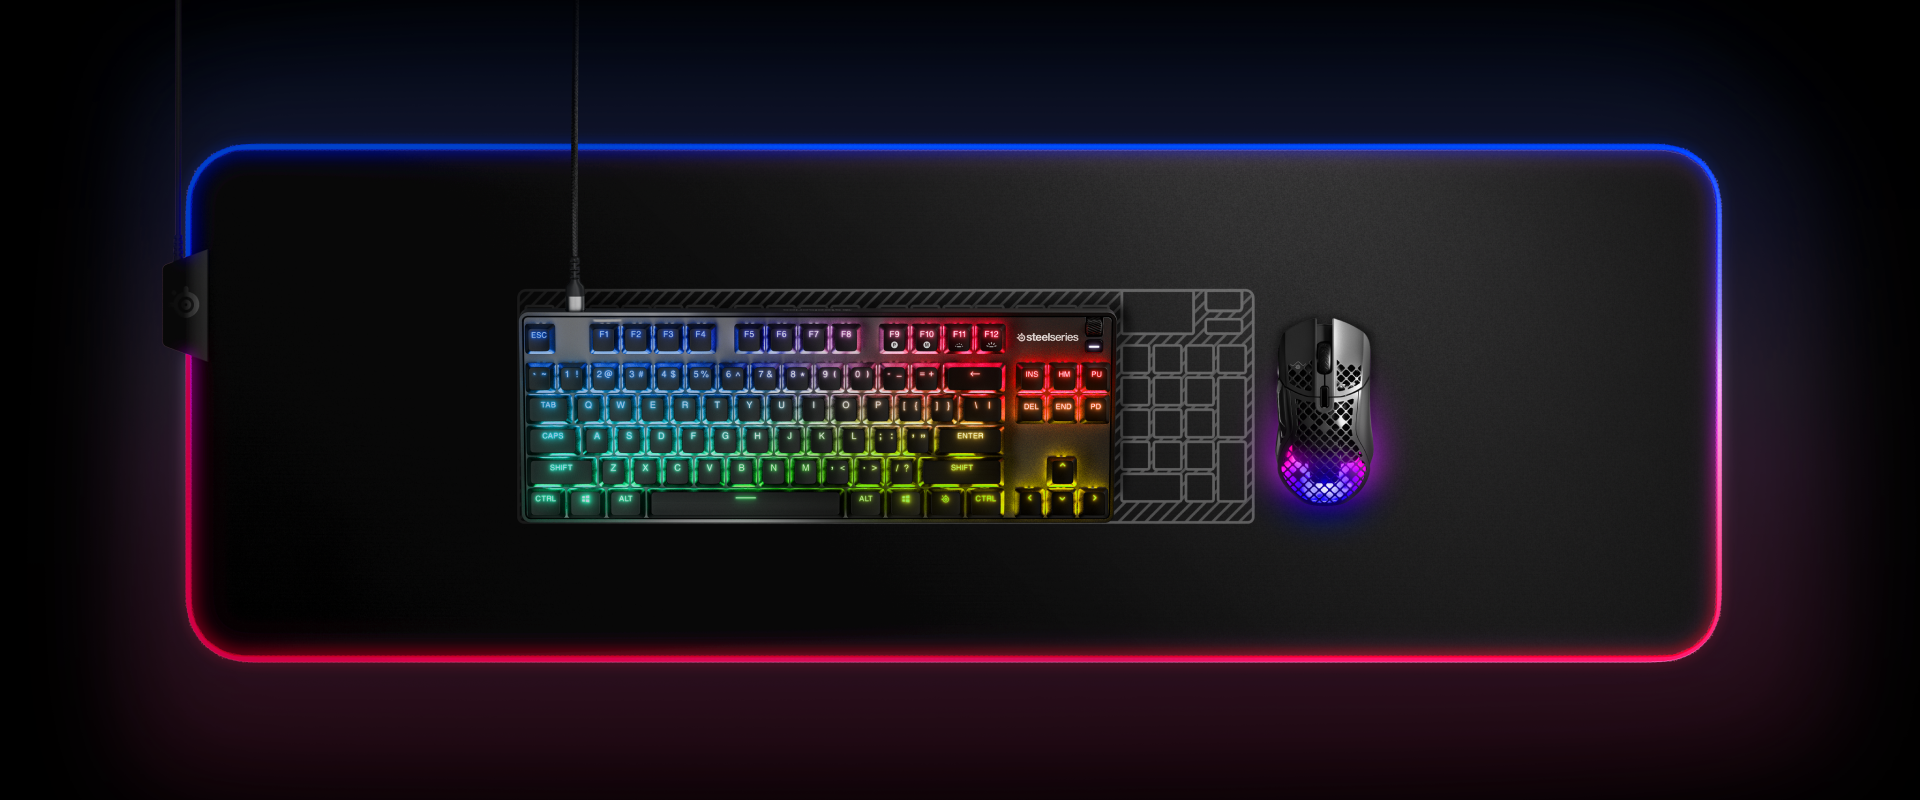 An Apex 9 keyboard with a blueprint of a full size Apex Pro keyboard behind it to illustrate the layout and size difference.